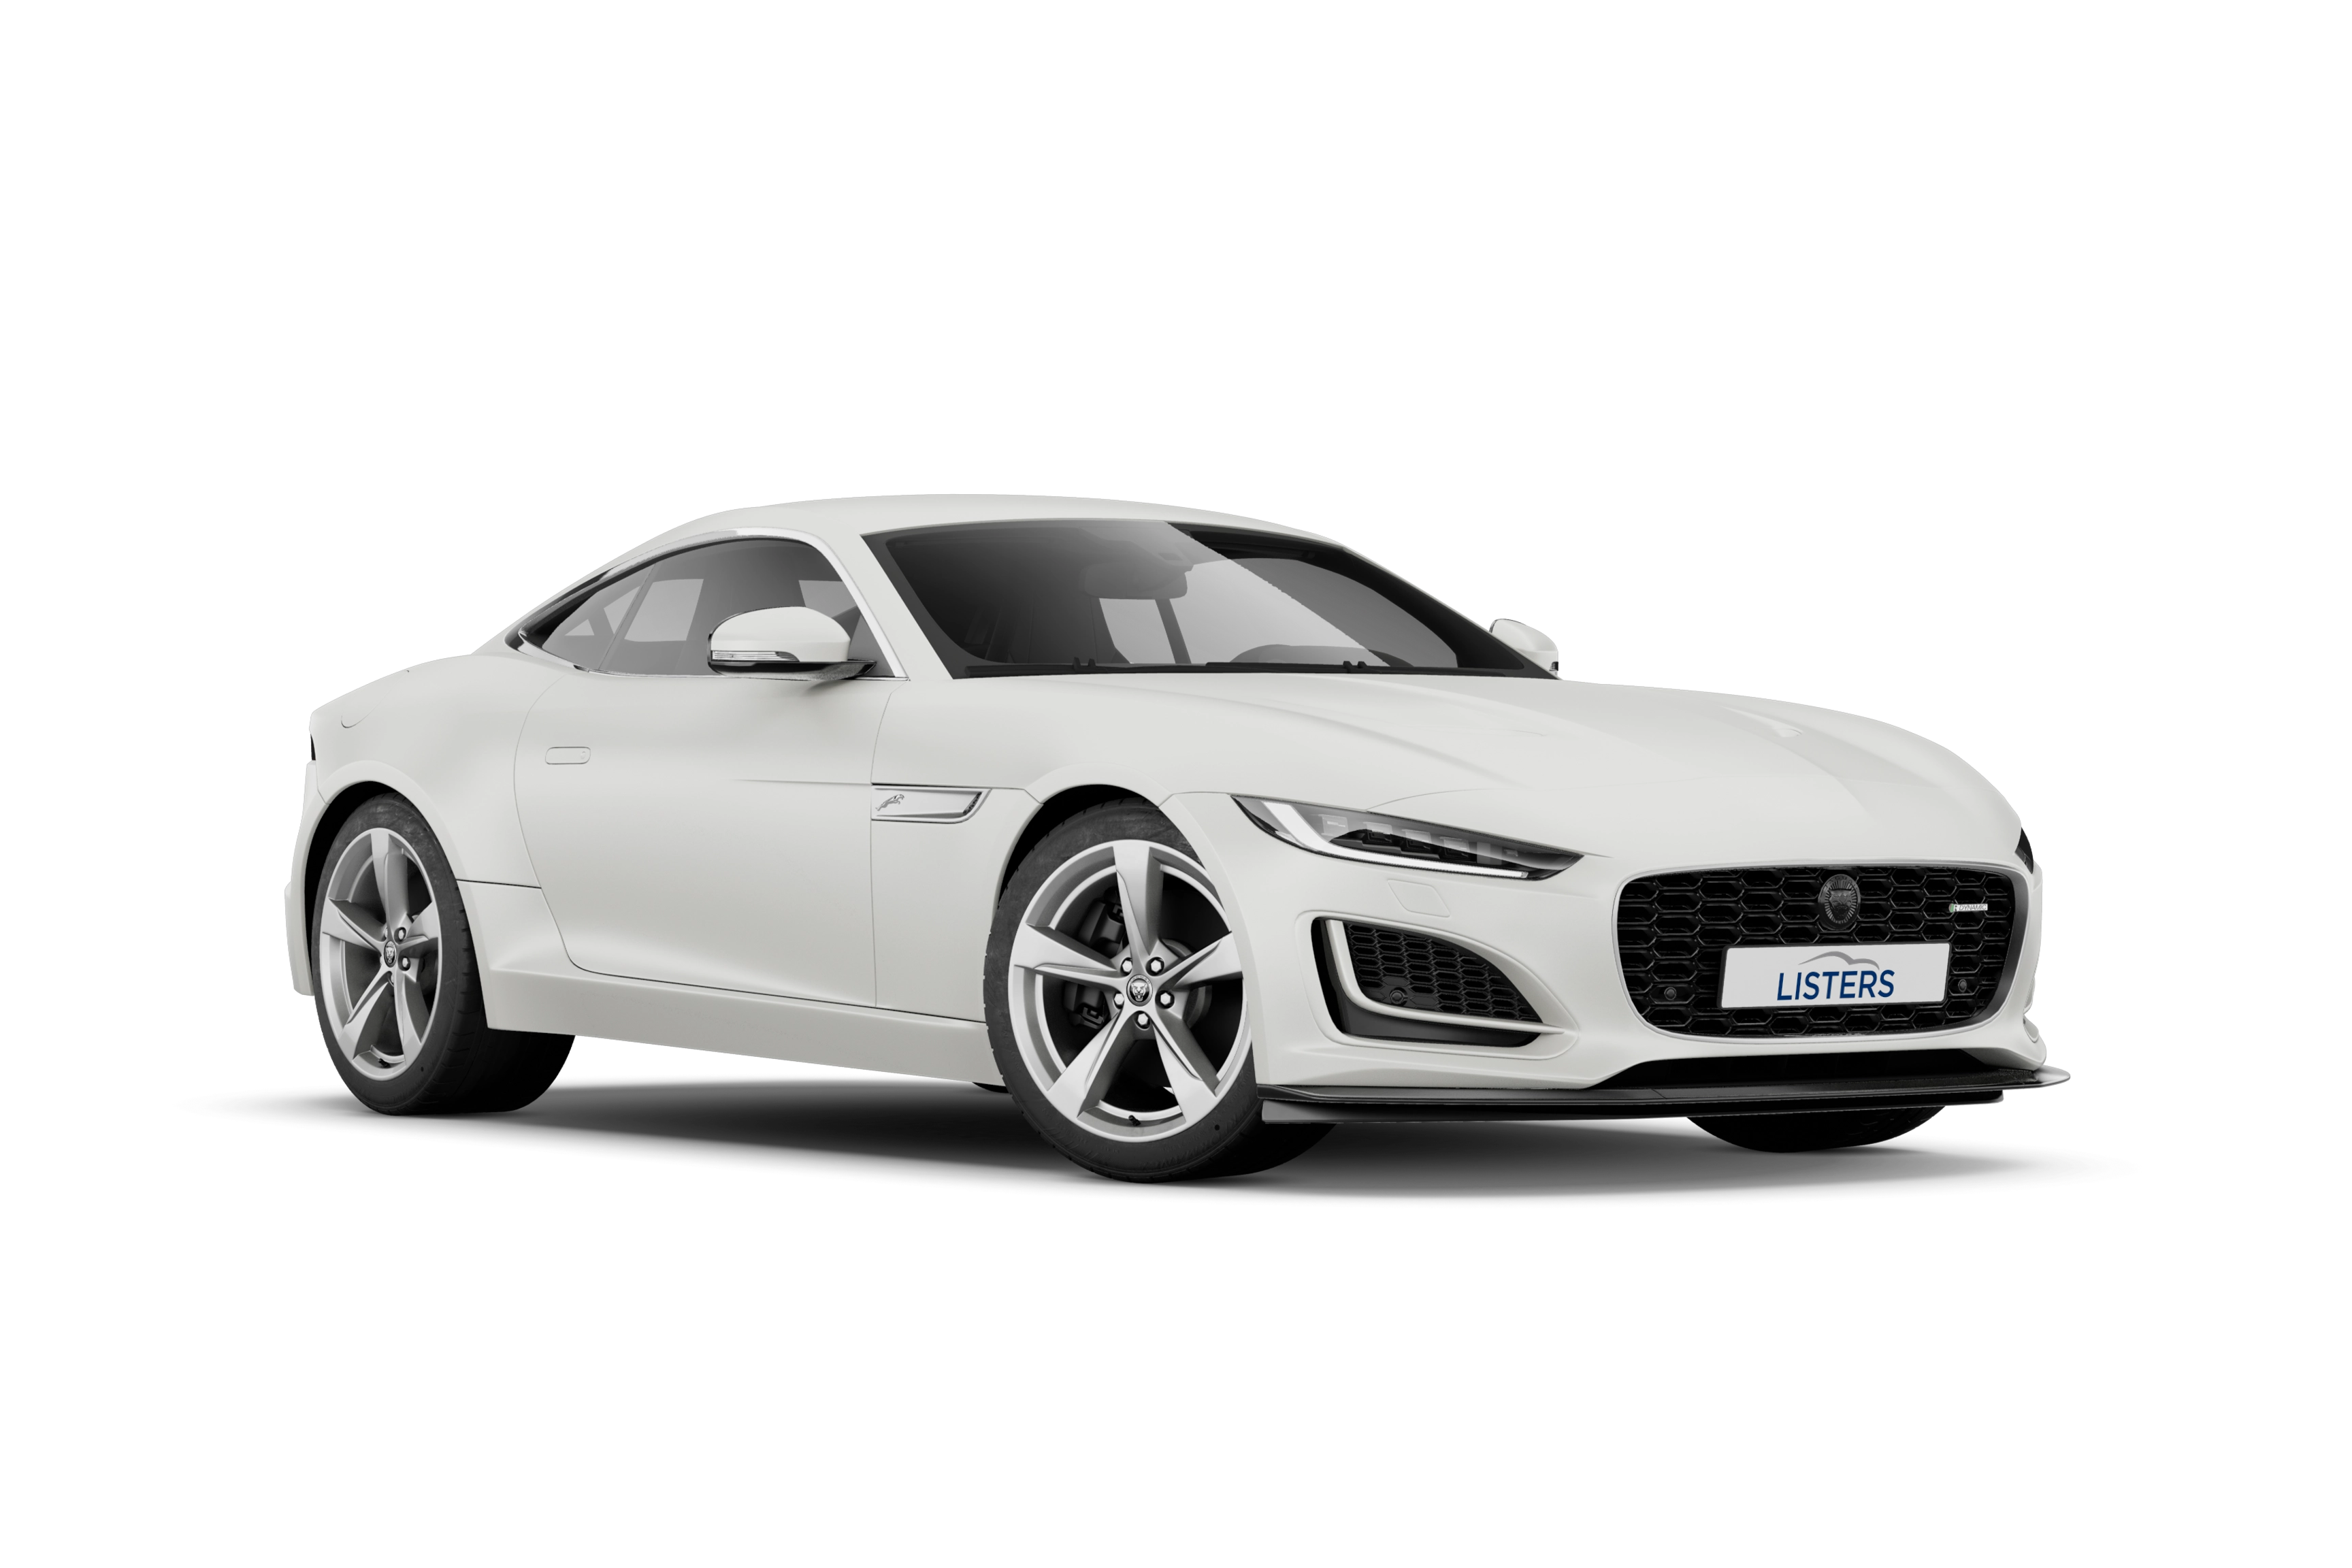 Jaguar F-TYPE Contract Hire & Leasing Offers